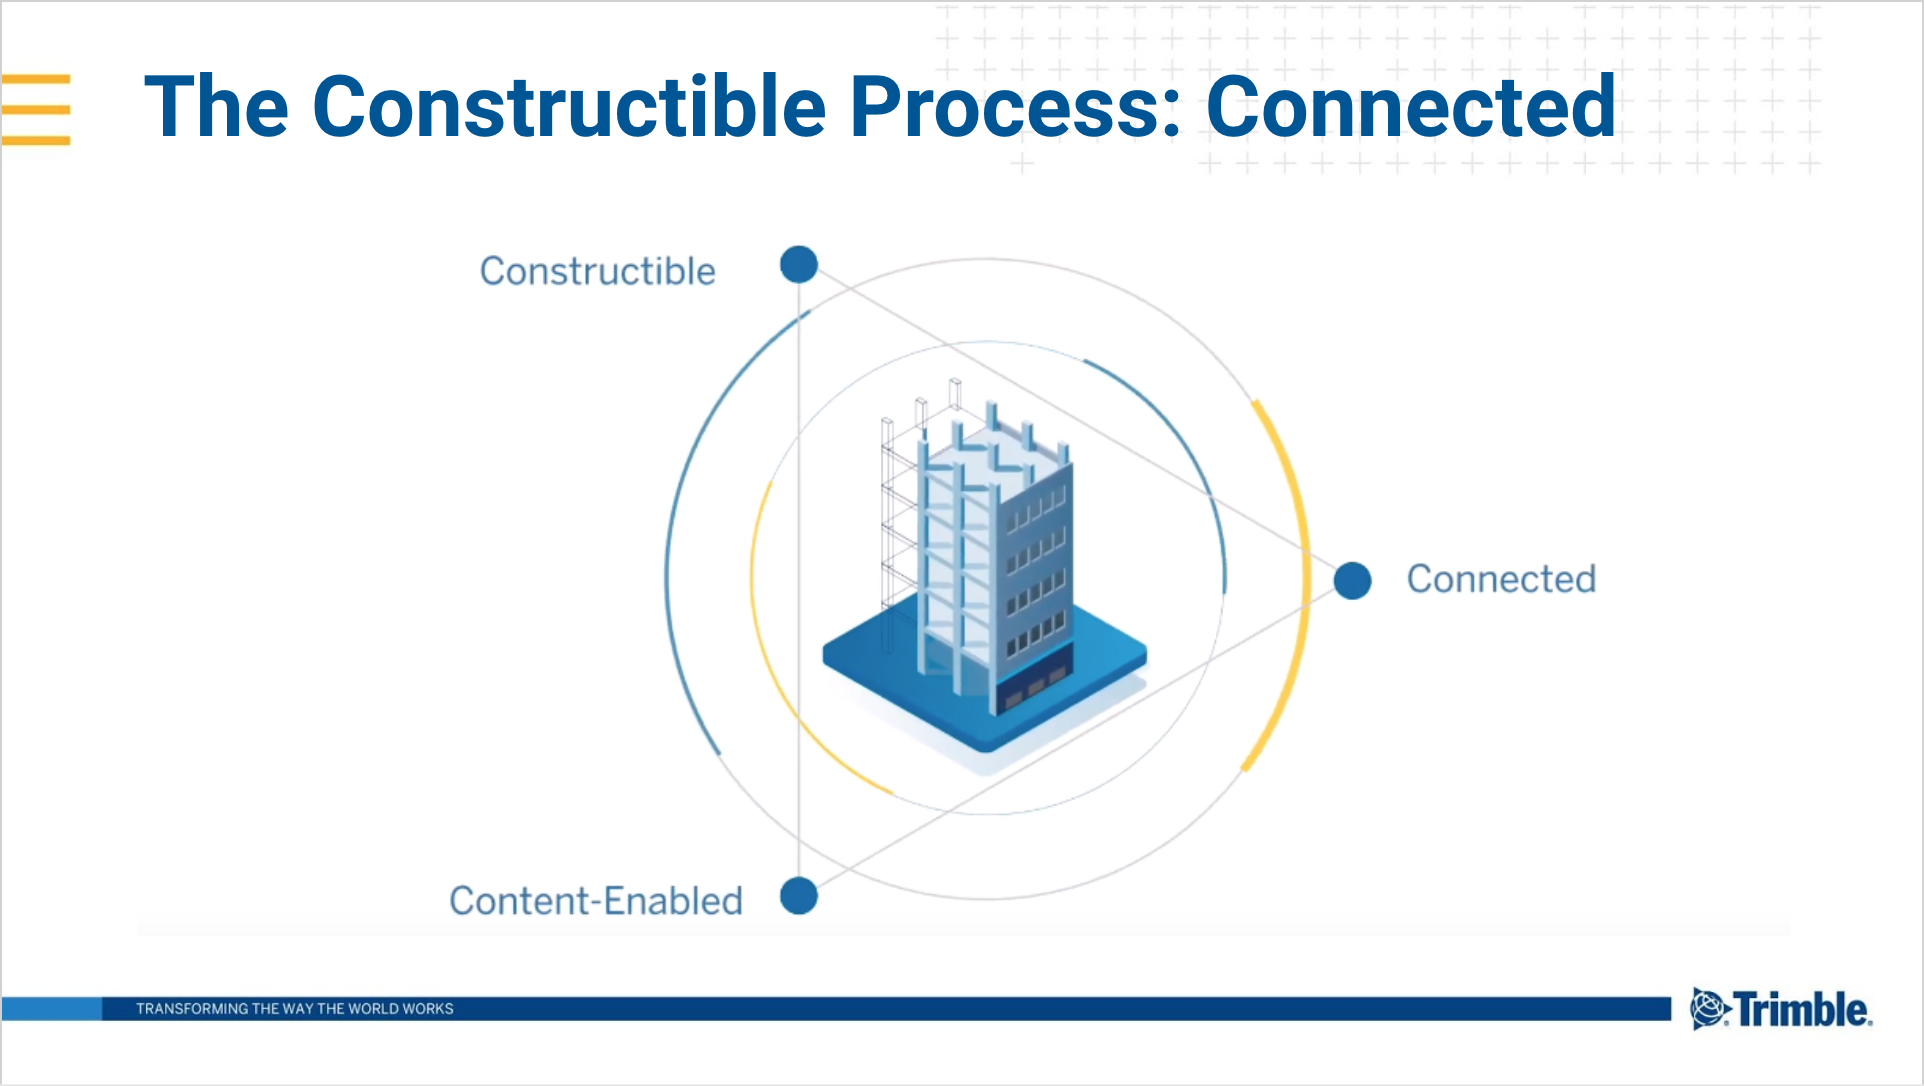 The Constructible Process: Connected